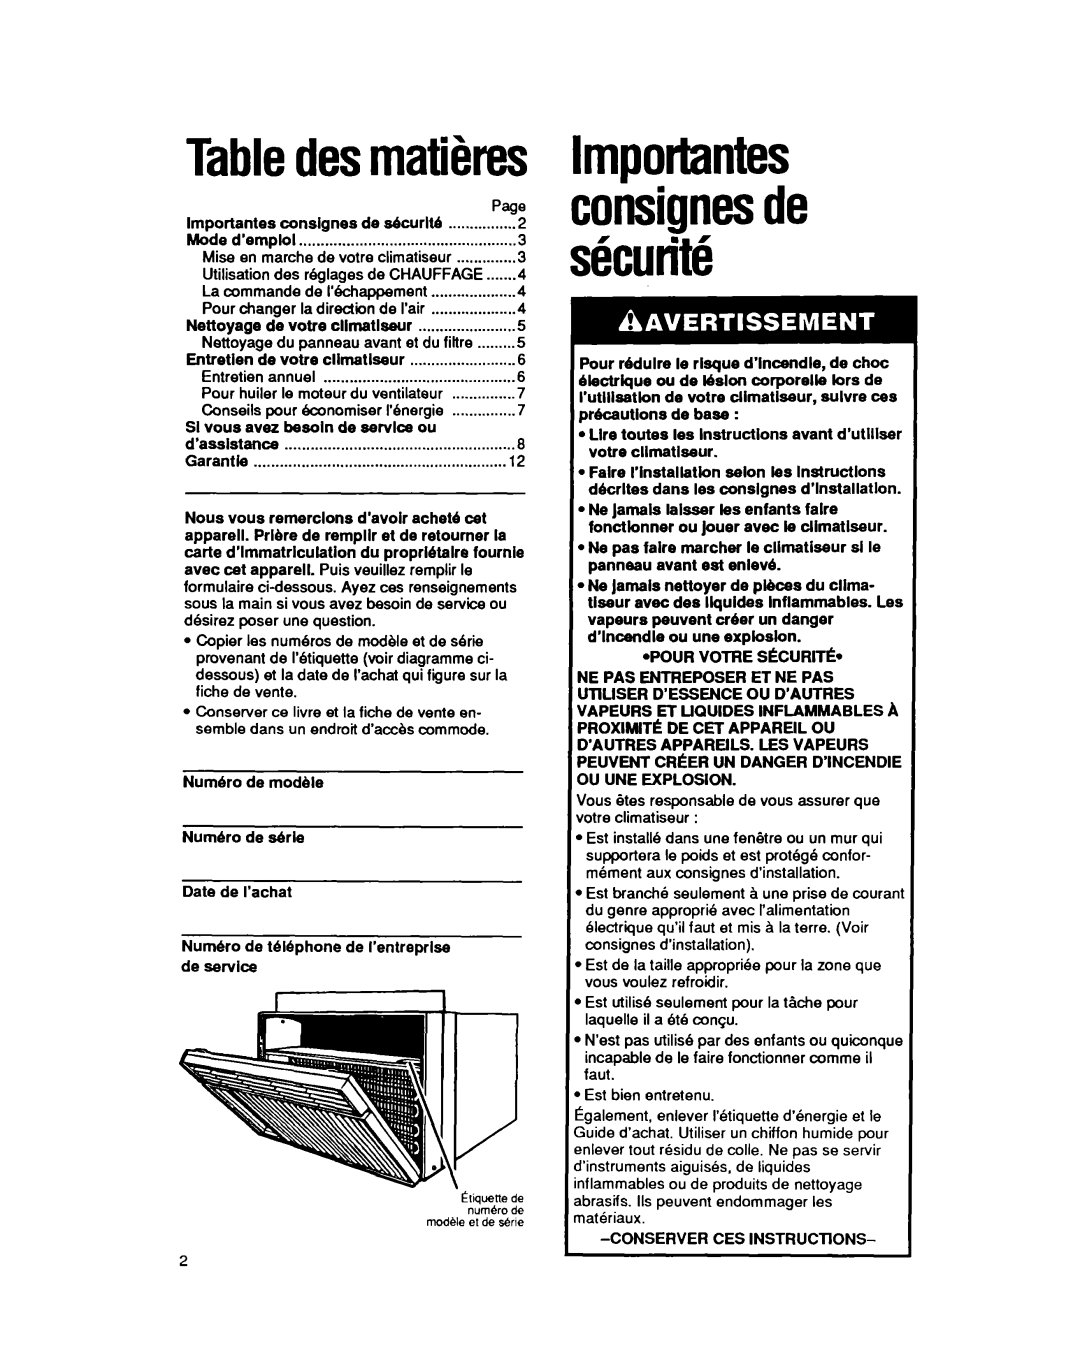 Whirlpool CAH12W04 manual Tabledesmatihes, Importantes consignesde s6curit6 